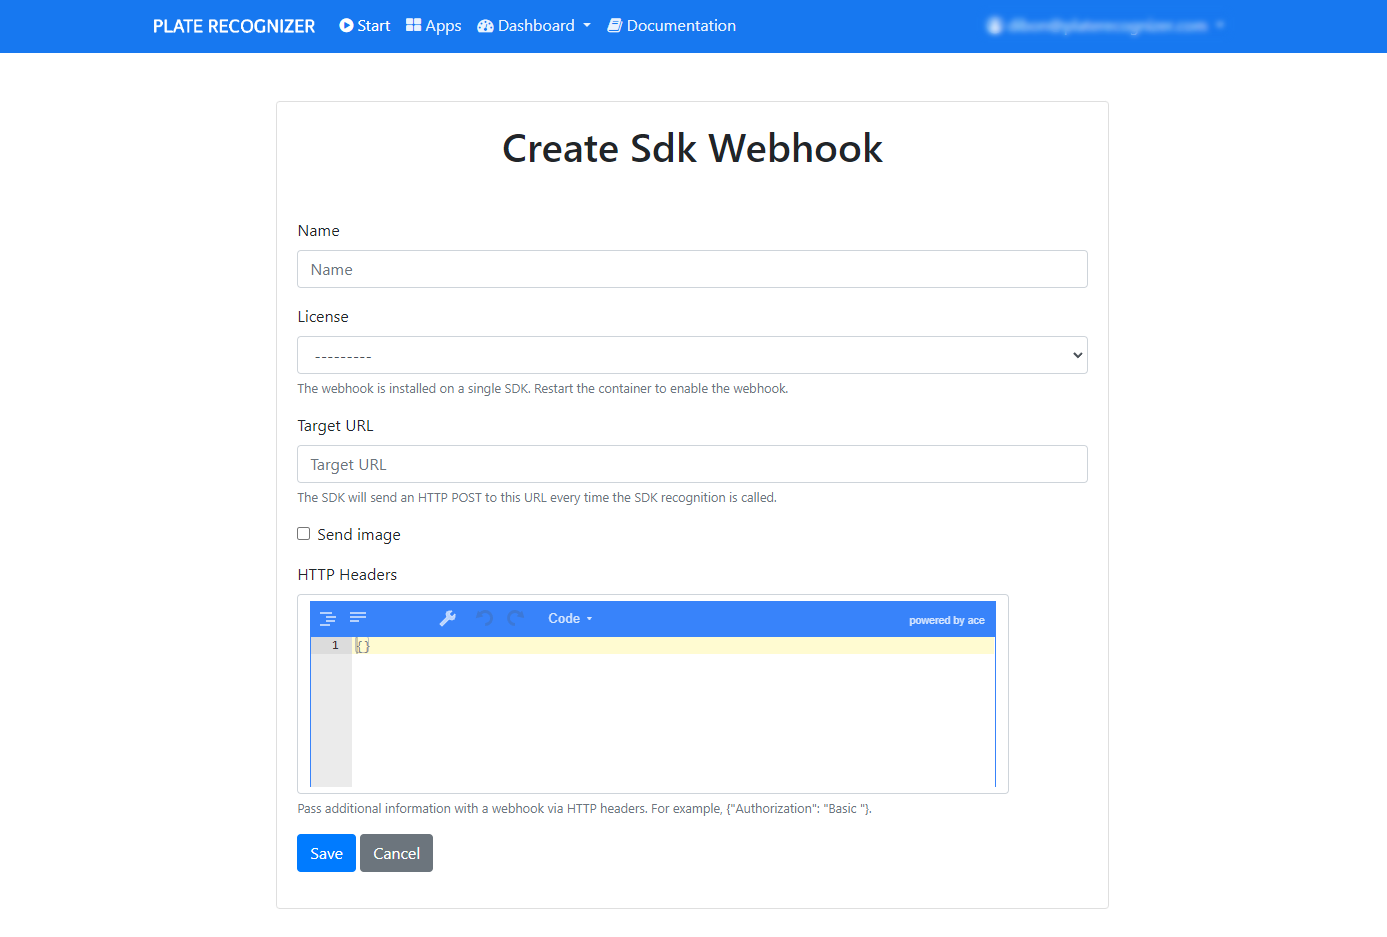 ParkPow-Plate-Recognizer-Snapshot-SDK-Create-Webhooks-Fill-Out-Form 